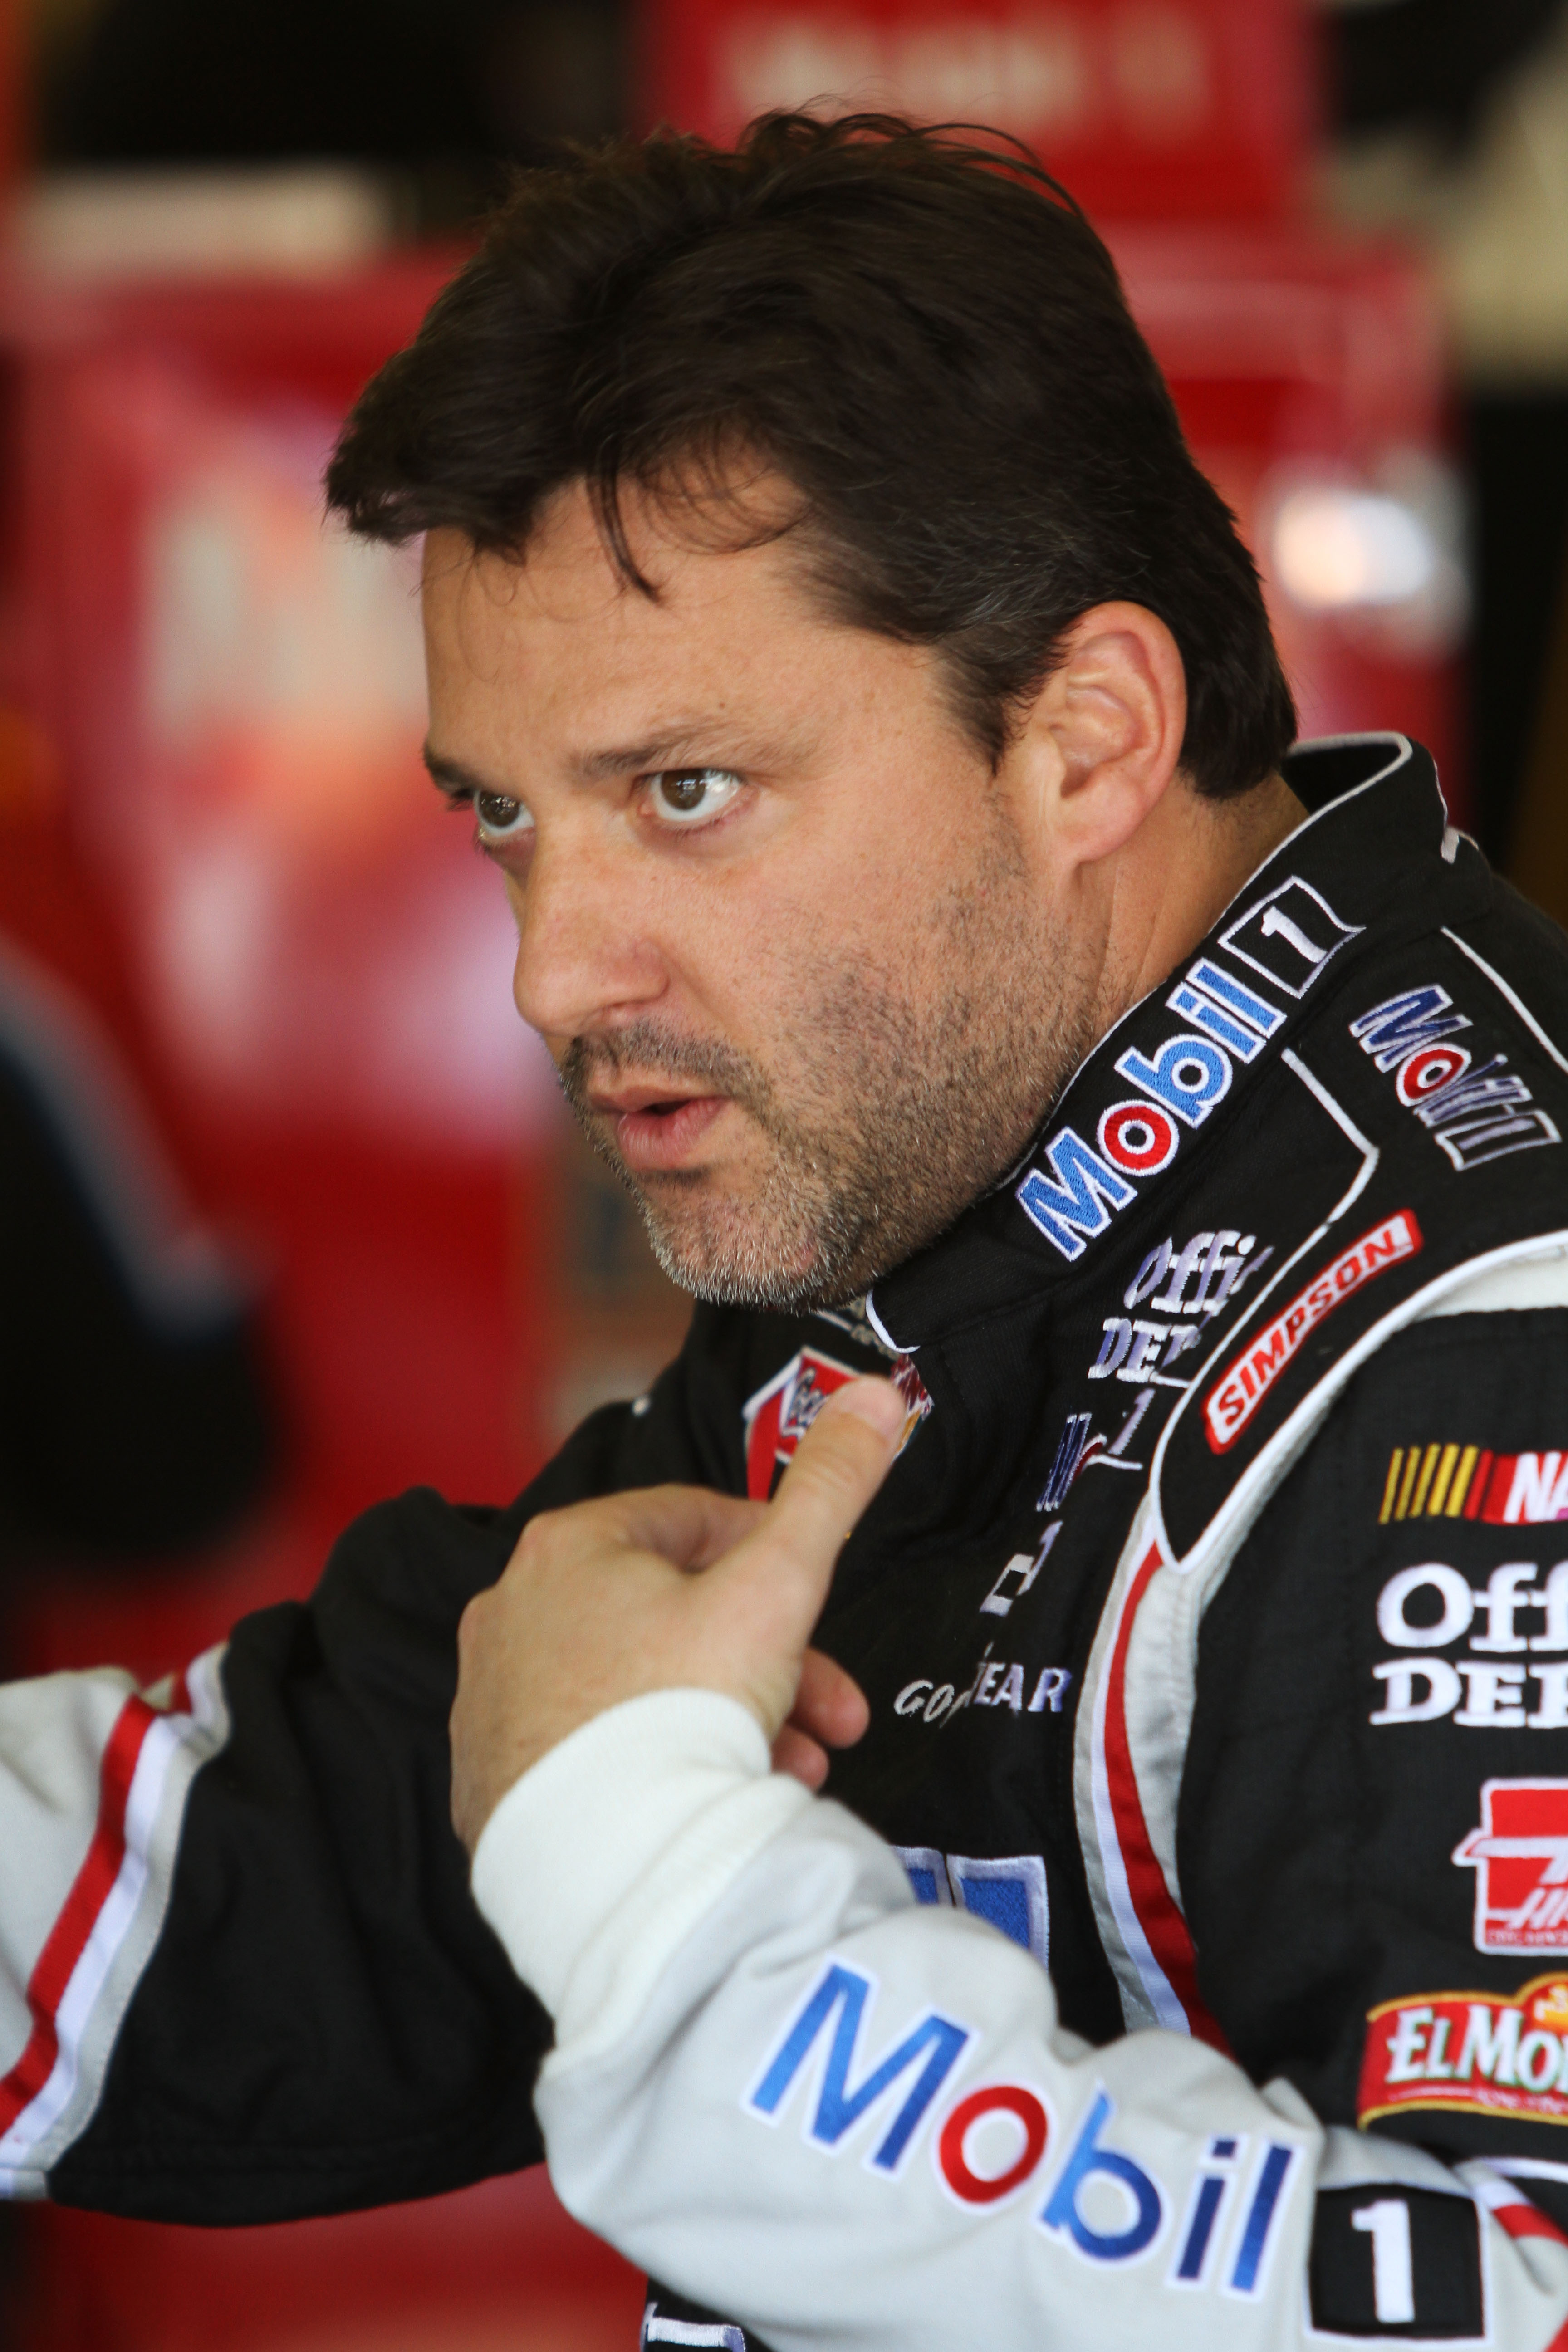 FORT WORTH, TX - APRIL 07:  Tony Stewart, driver of the #14 Mobil 1/Office Depot Chevrolet, stands in the garage during practice for the NASCAR Sprint Cup Series Samsung Mobile 500 at Texas Motor Speedway on April 7, 2011 in Fort Worth, Texas.  (Photo by